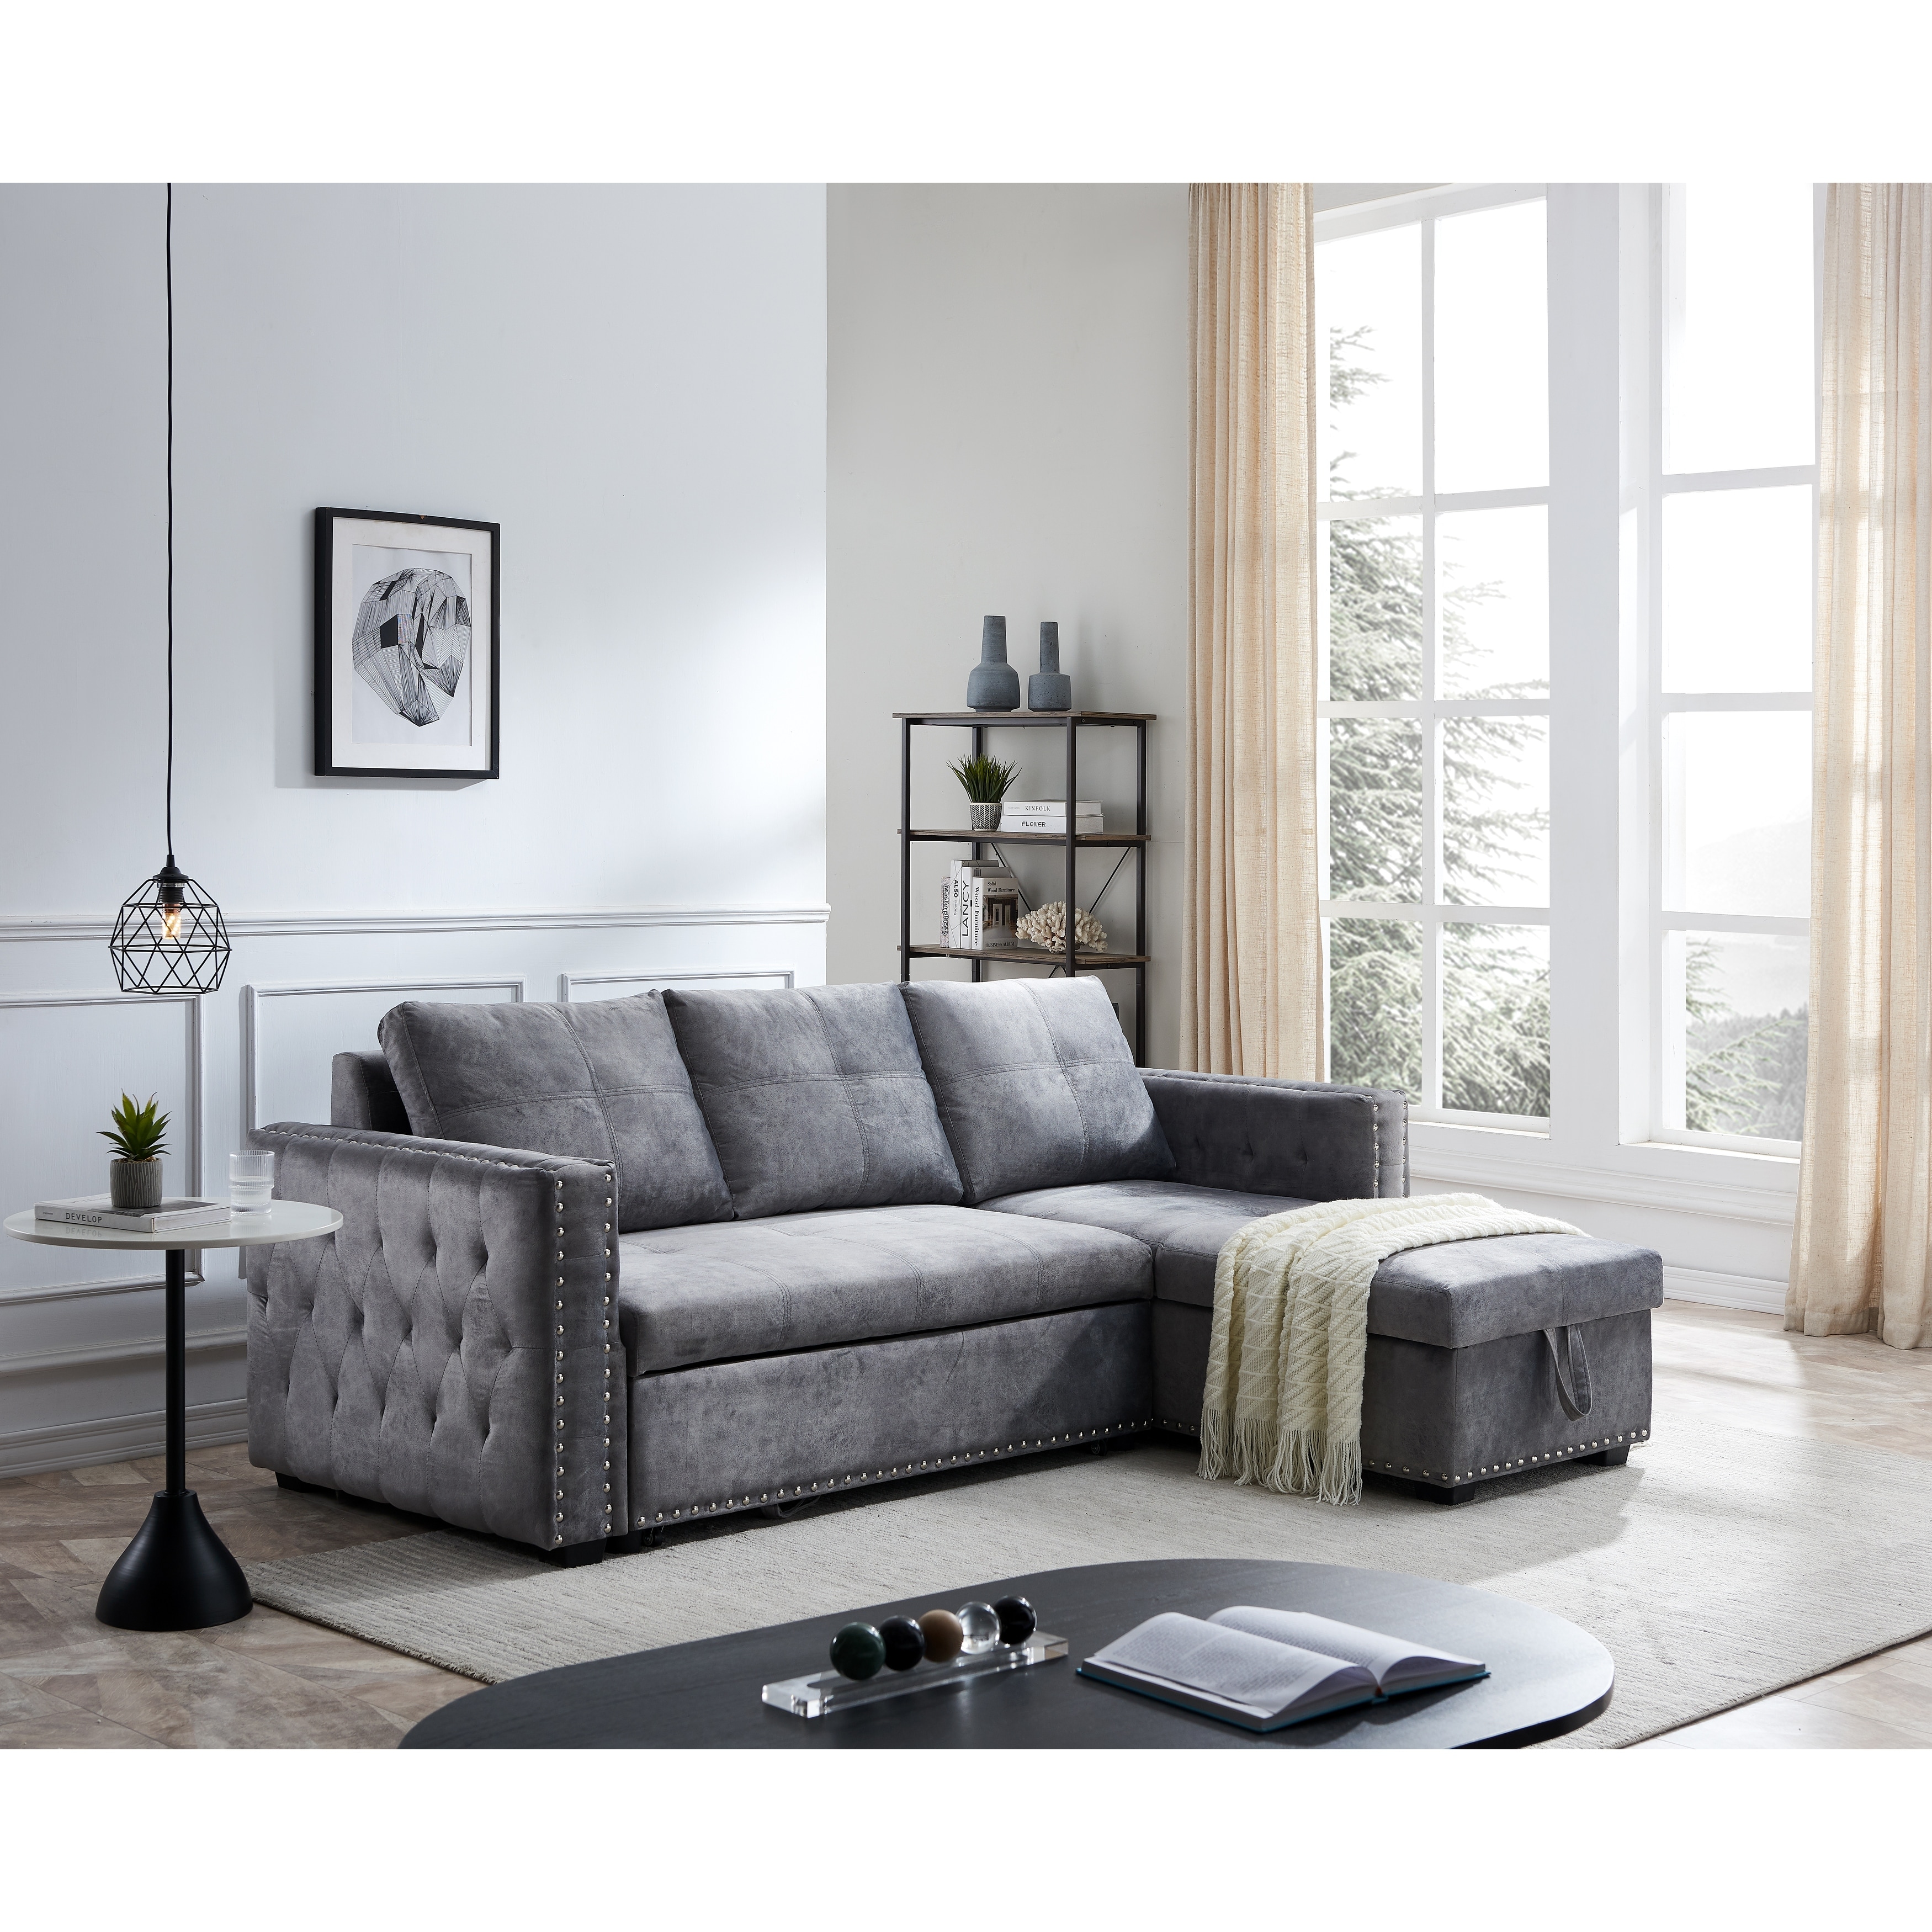 Sectional Sofa With Pulled Out Bed  2 Seats Sofa And Reversible Chaise With Storage  Both Hands With Copper Nail  Grey